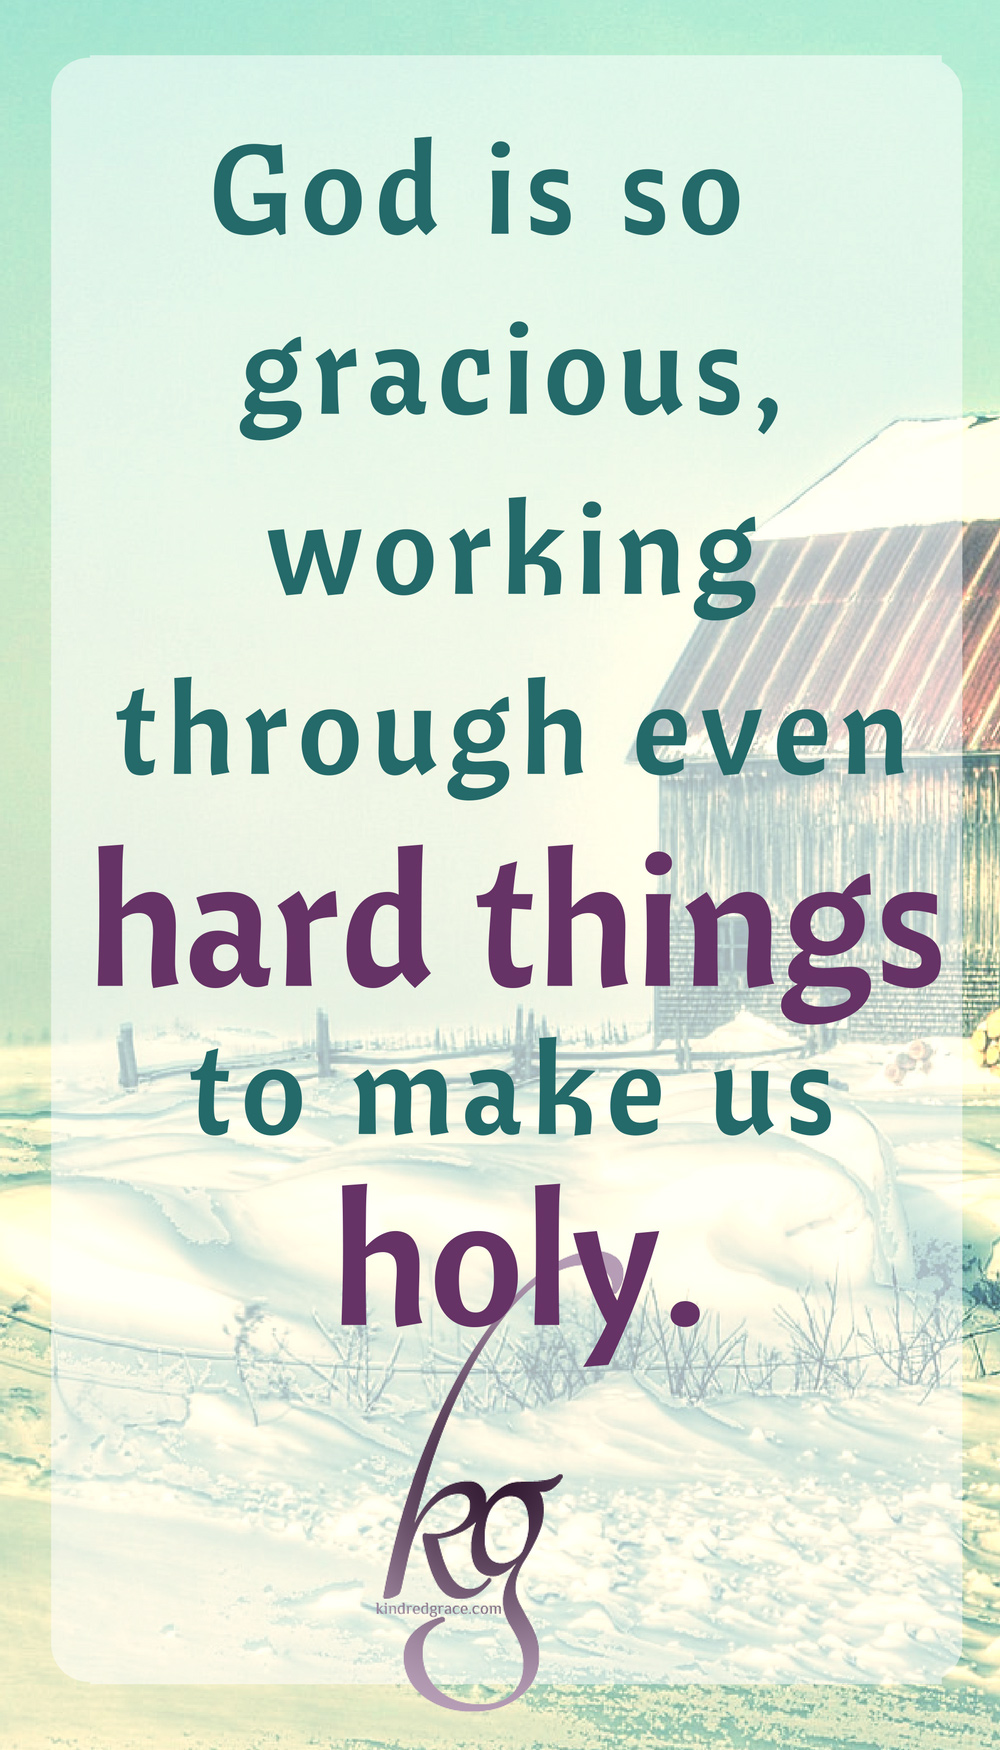 God is so gracious, working through even hard things to make us holy.